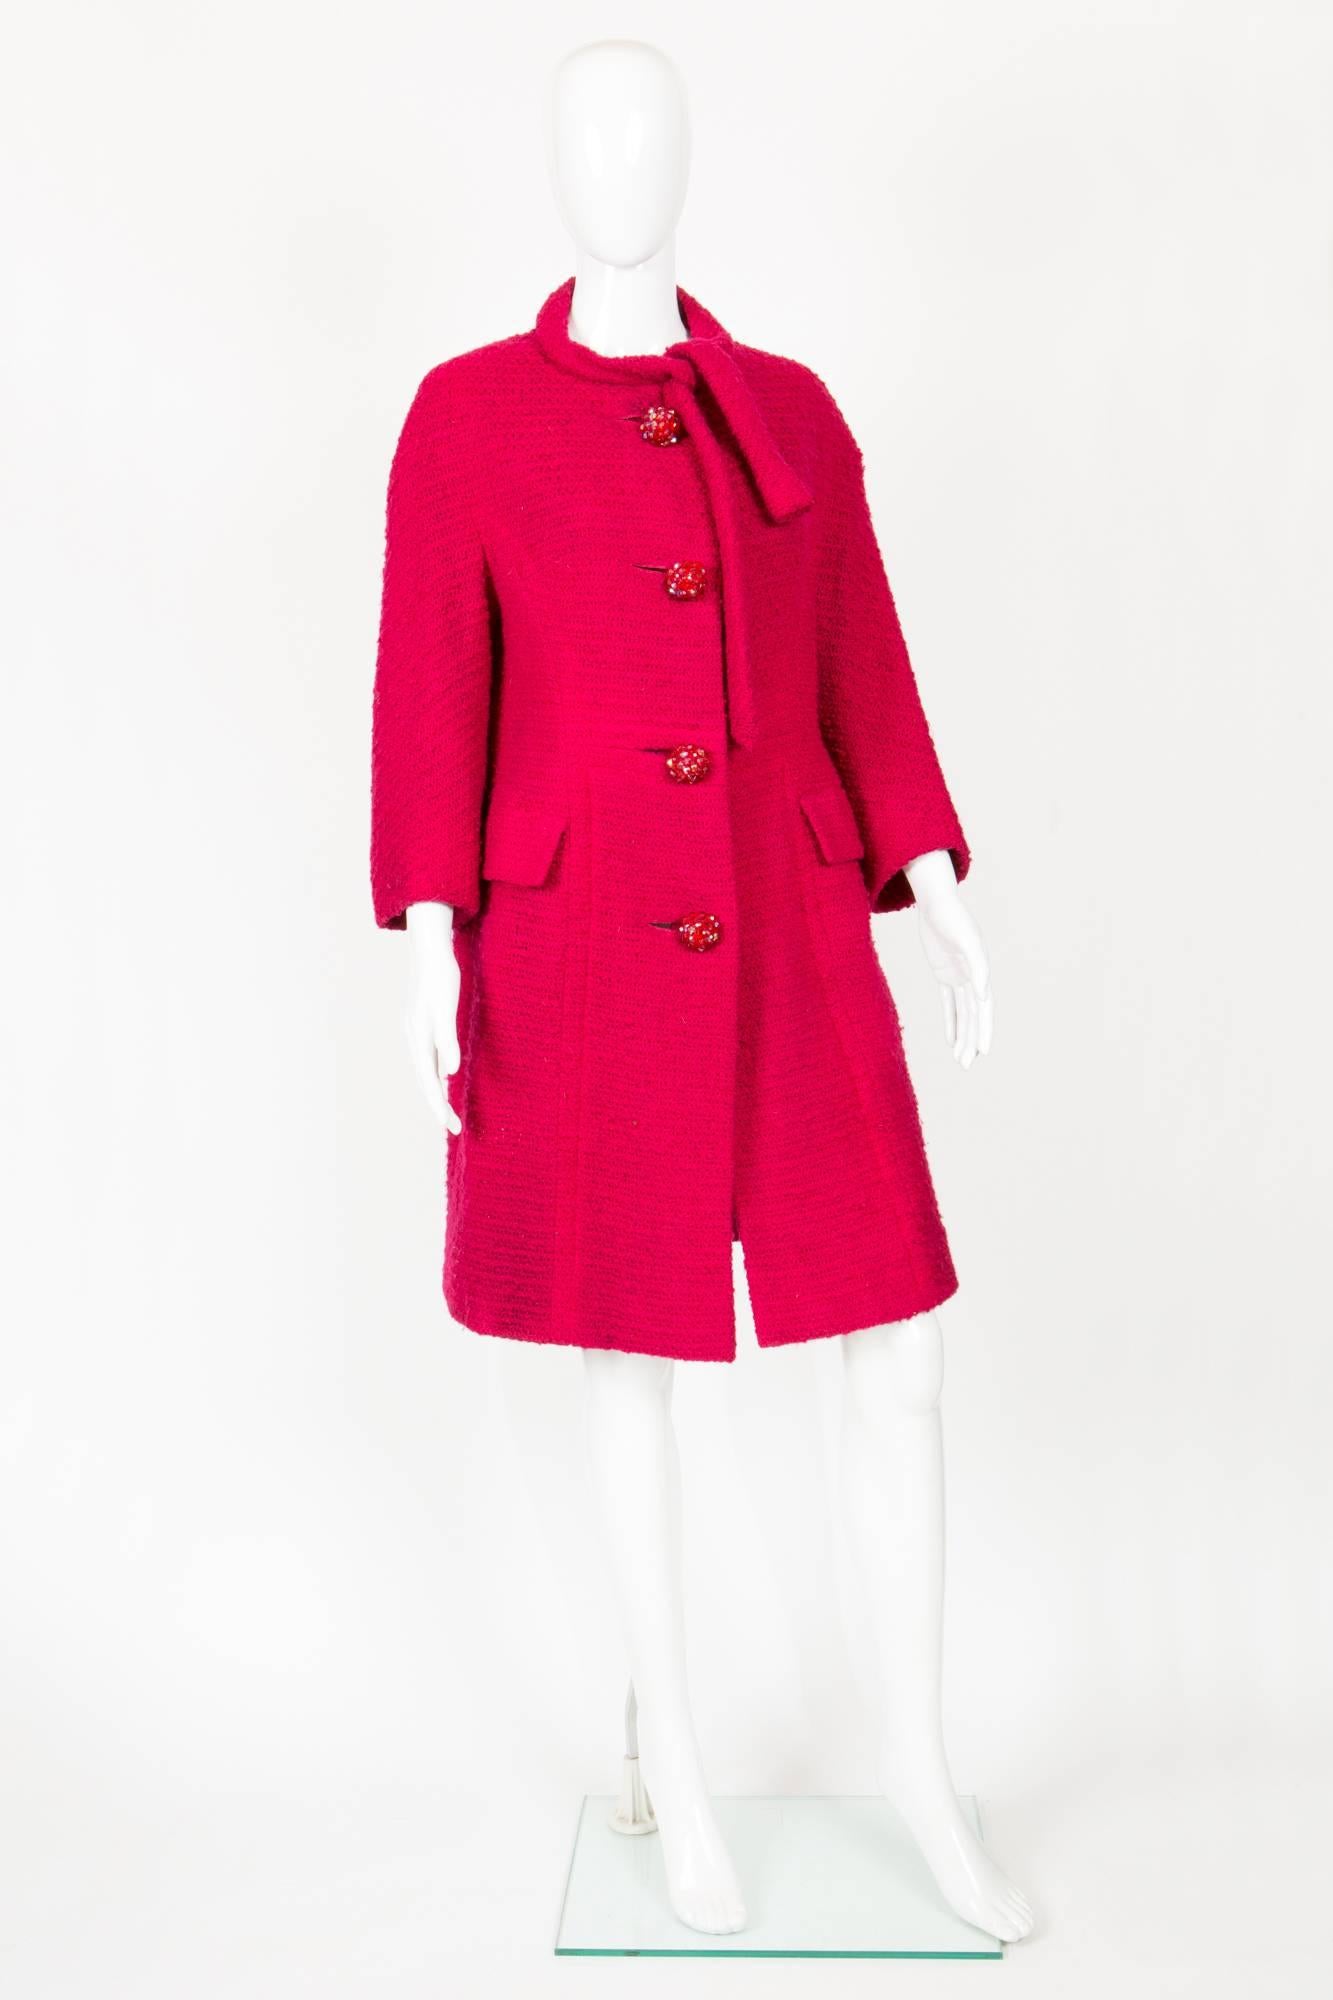 1960s red boucle wool Marie Martine coat featuring gorgeous glass buttons, 3/4 sleeves, a tie neck.  
In good vintage condition. Made in France. 100% wool
Estimated size 38fr/US6 /UK10
We guarantee you will receive this gorgeous item as described